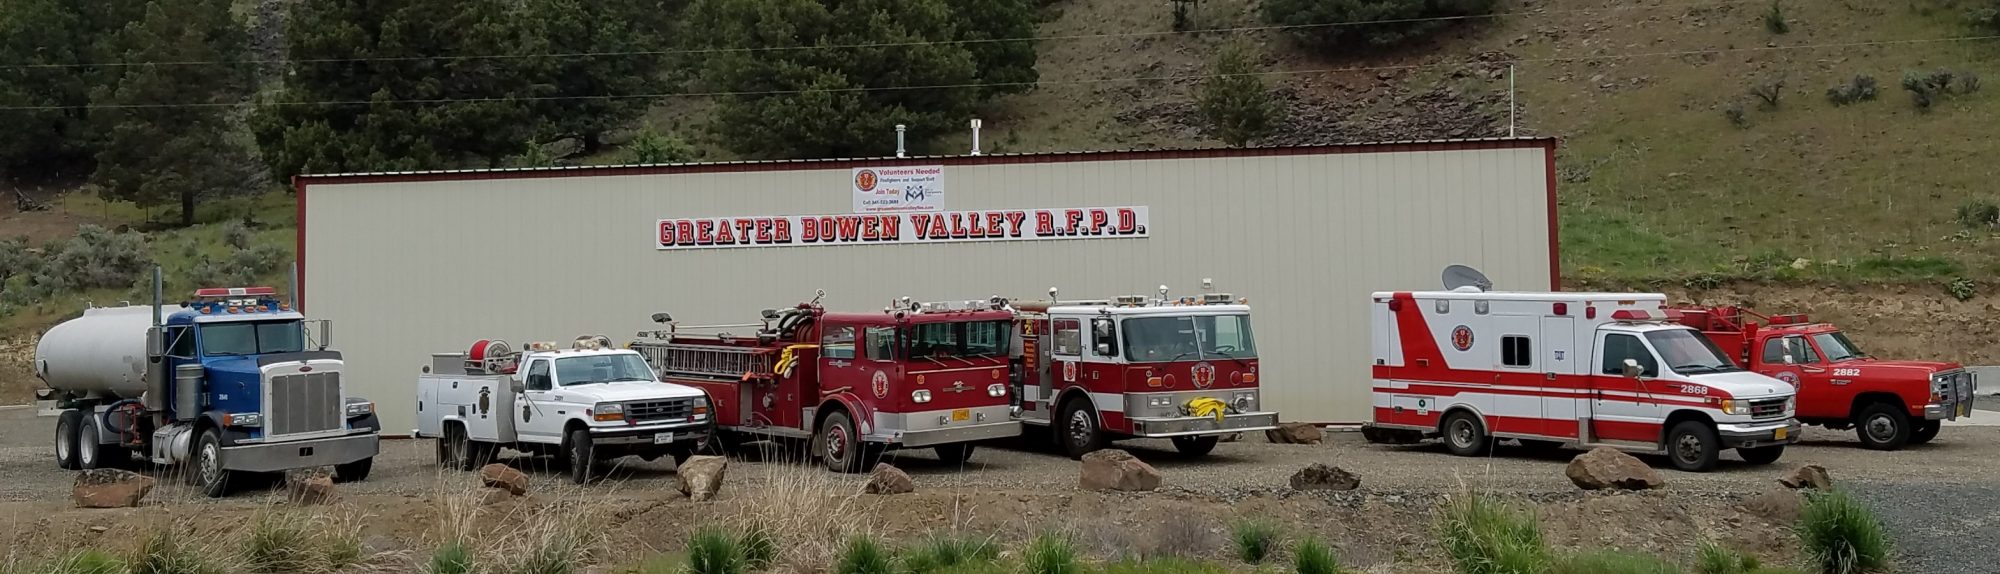 Greater Bowen Valley Rural Fire Protection District